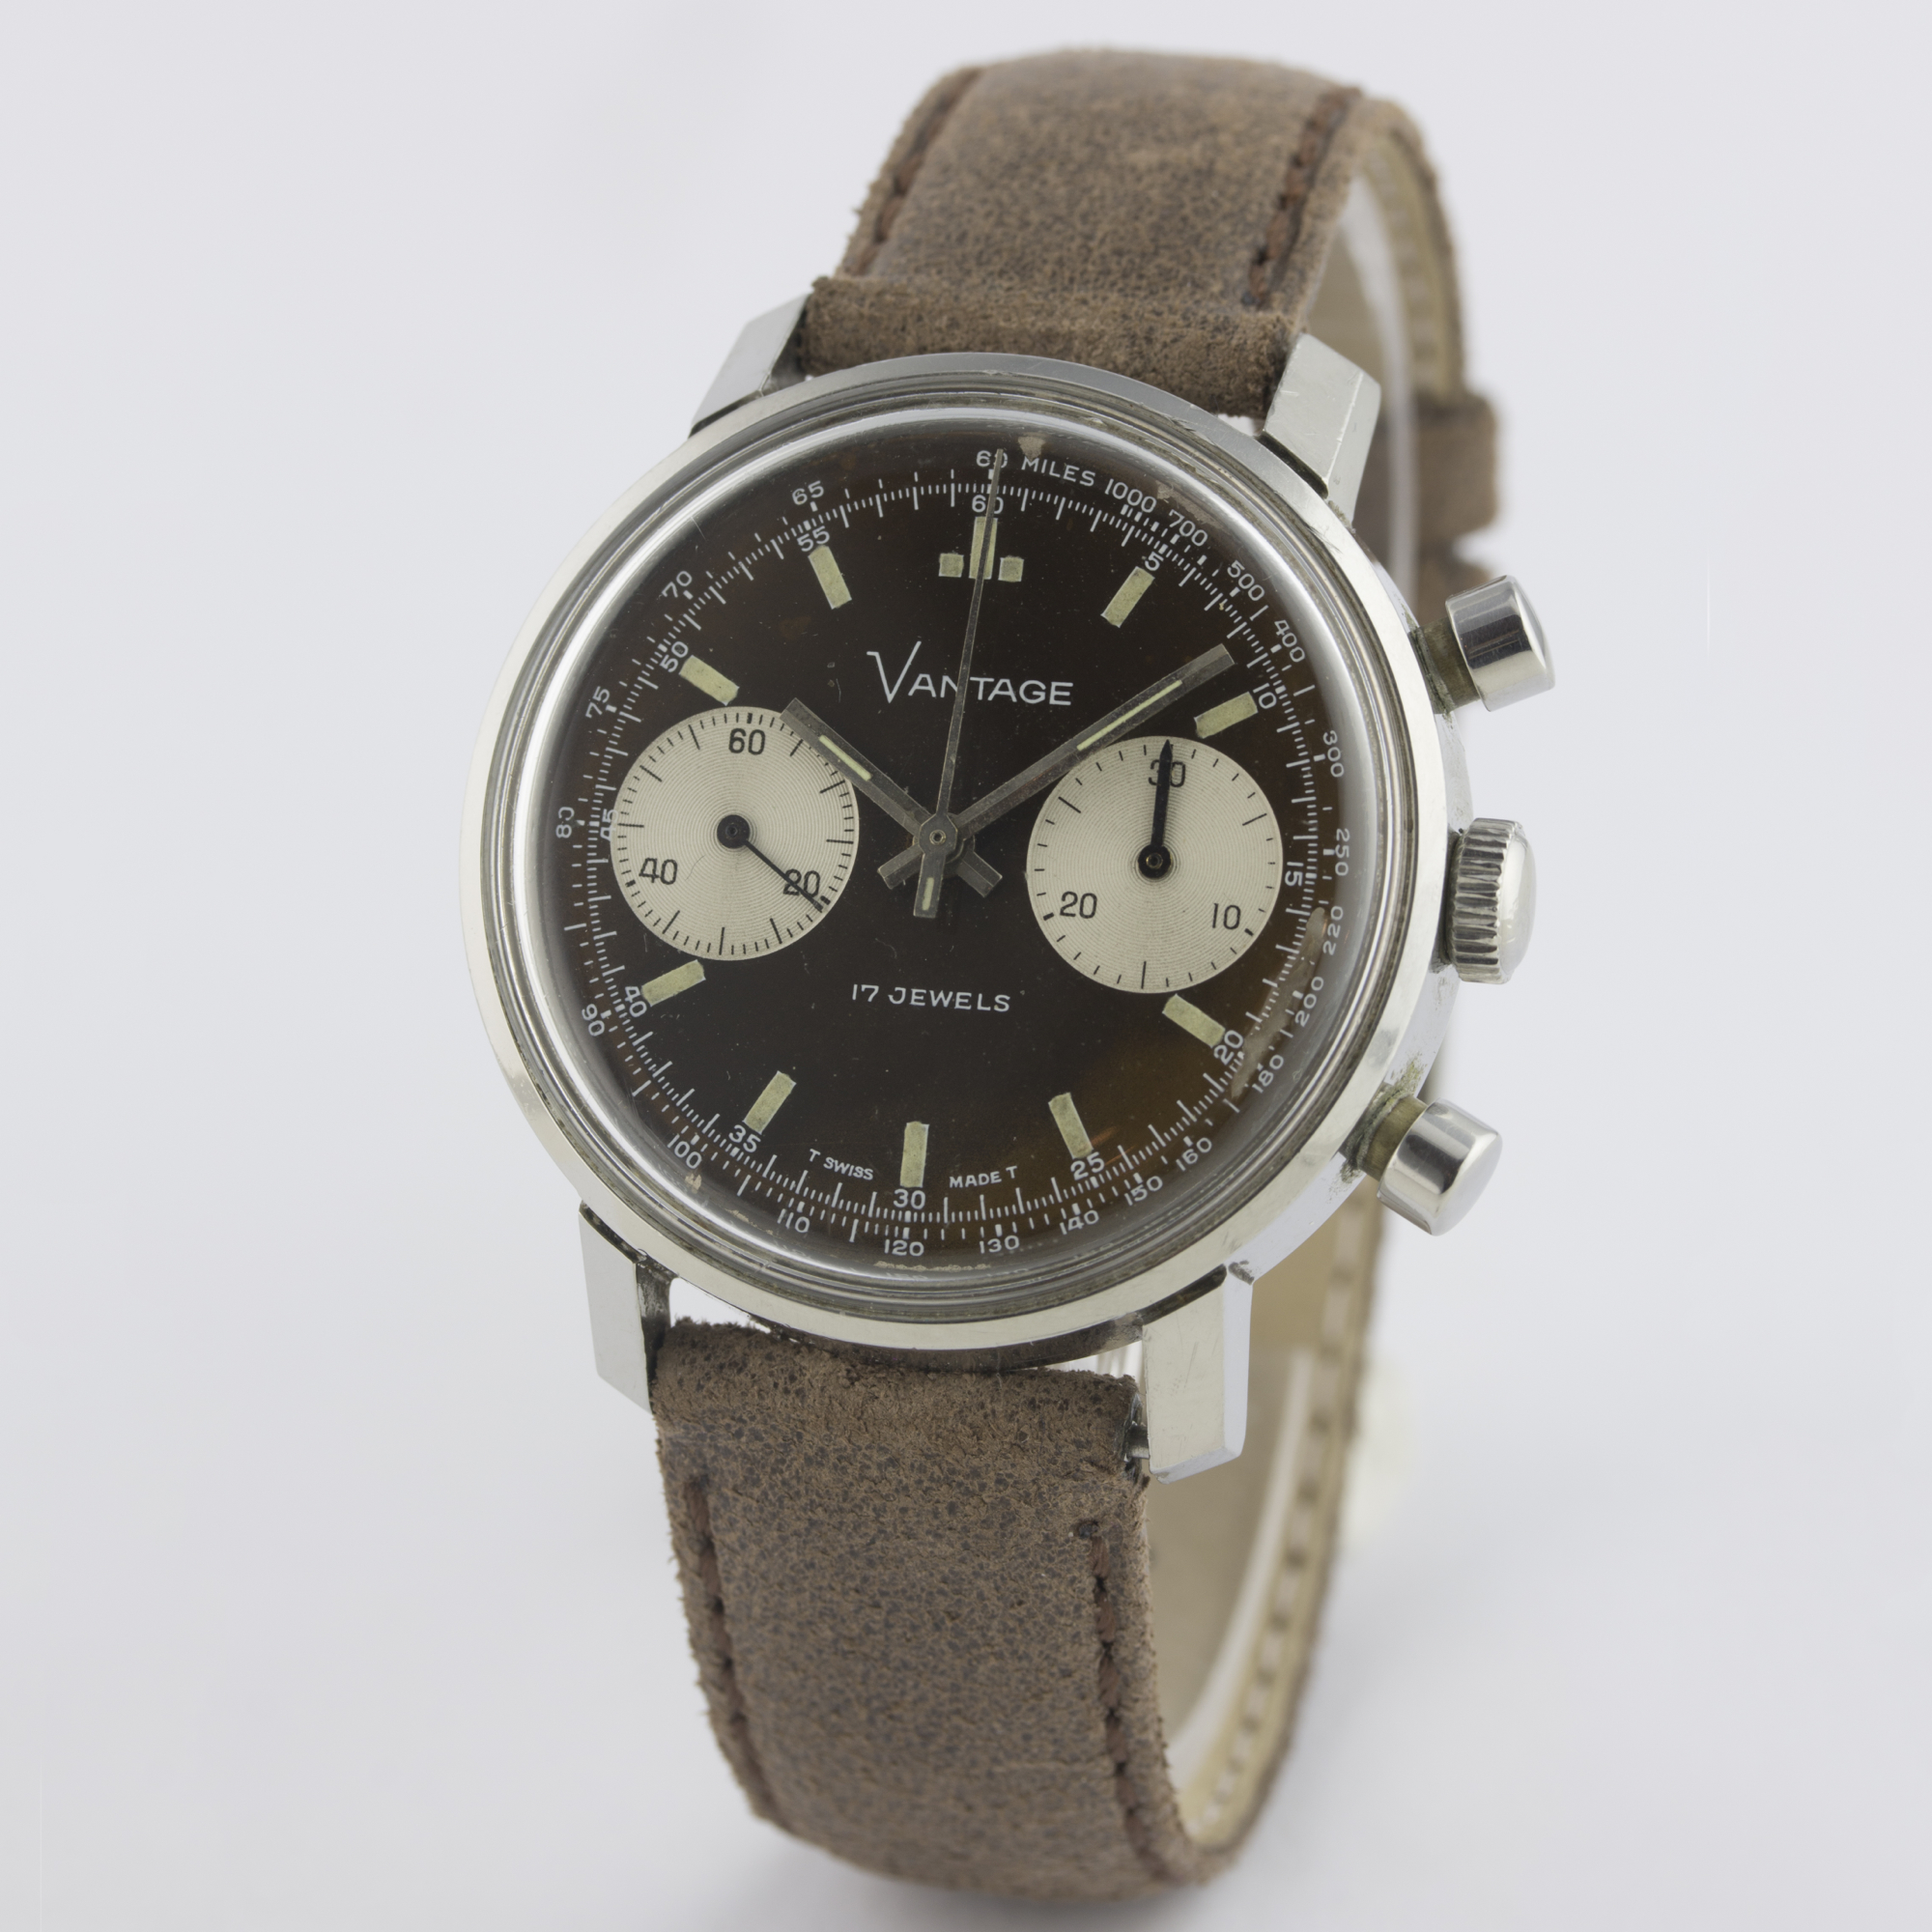 A GENTLEMAN’S STAINLESS STEEL VANTAGE CHRONOGRAPH WRIST WATCH CIRCA 1970 WITH "CHOCOLATE" DIAL D: - Image 4 of 8